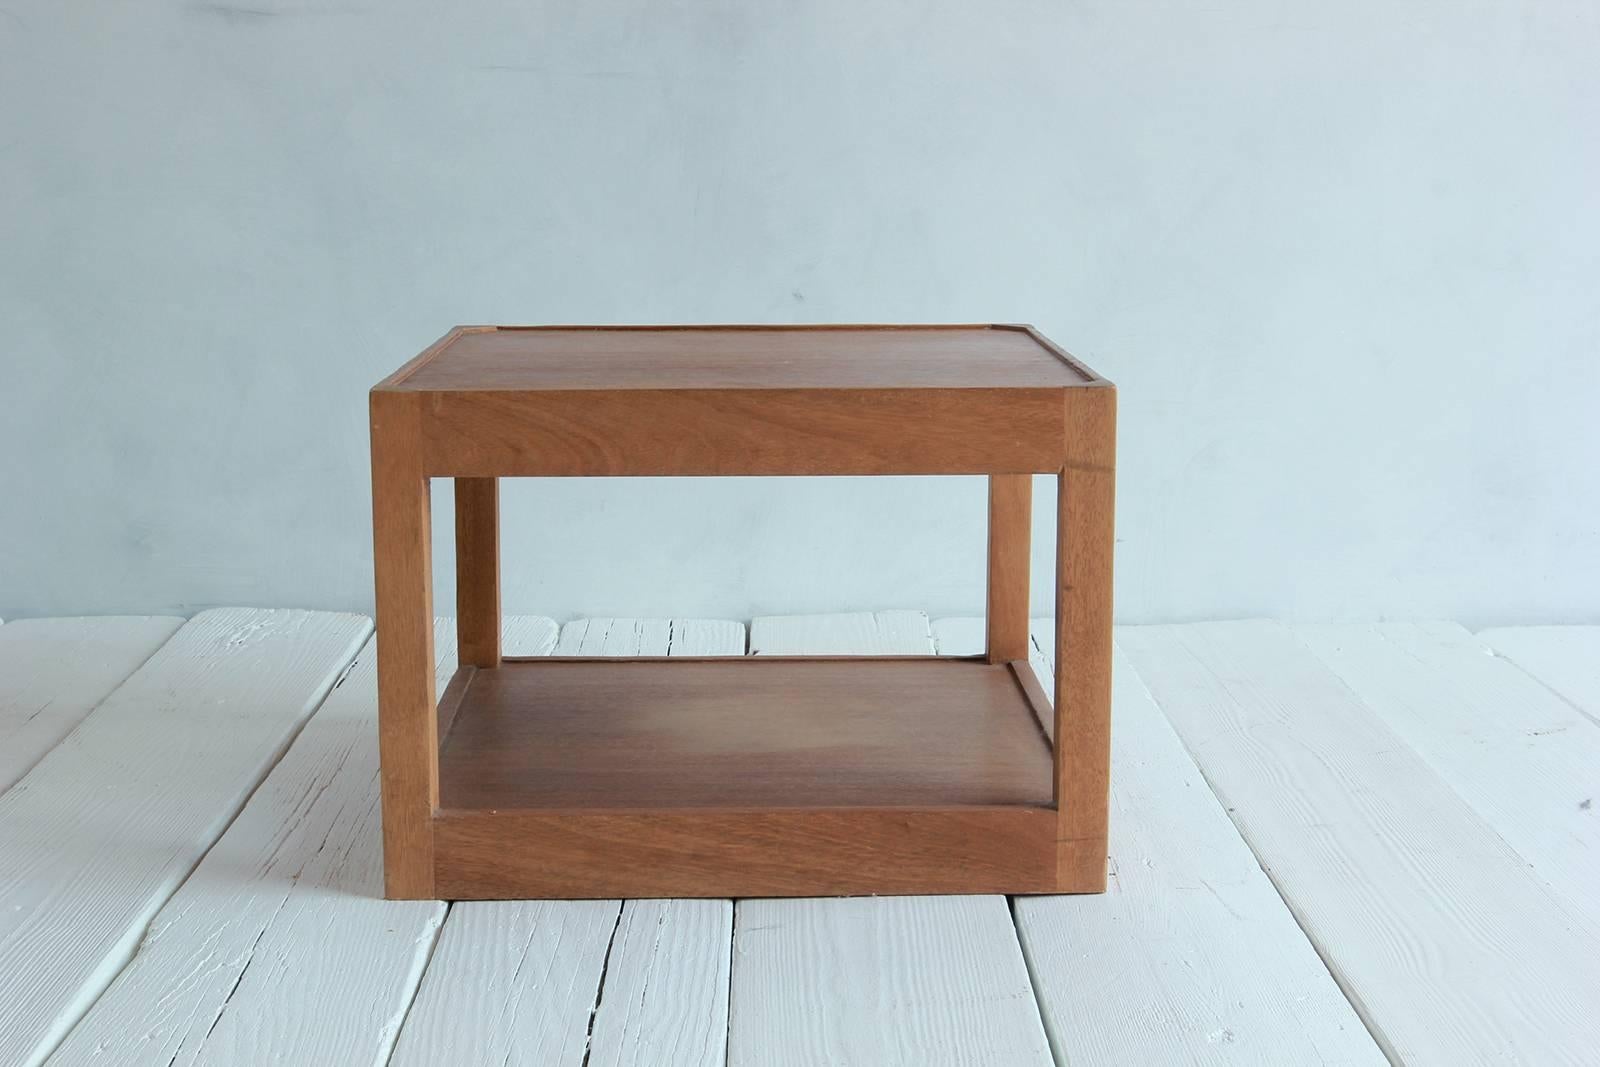 Walnut side table with bottom shelf and parson style legs with single drawer.